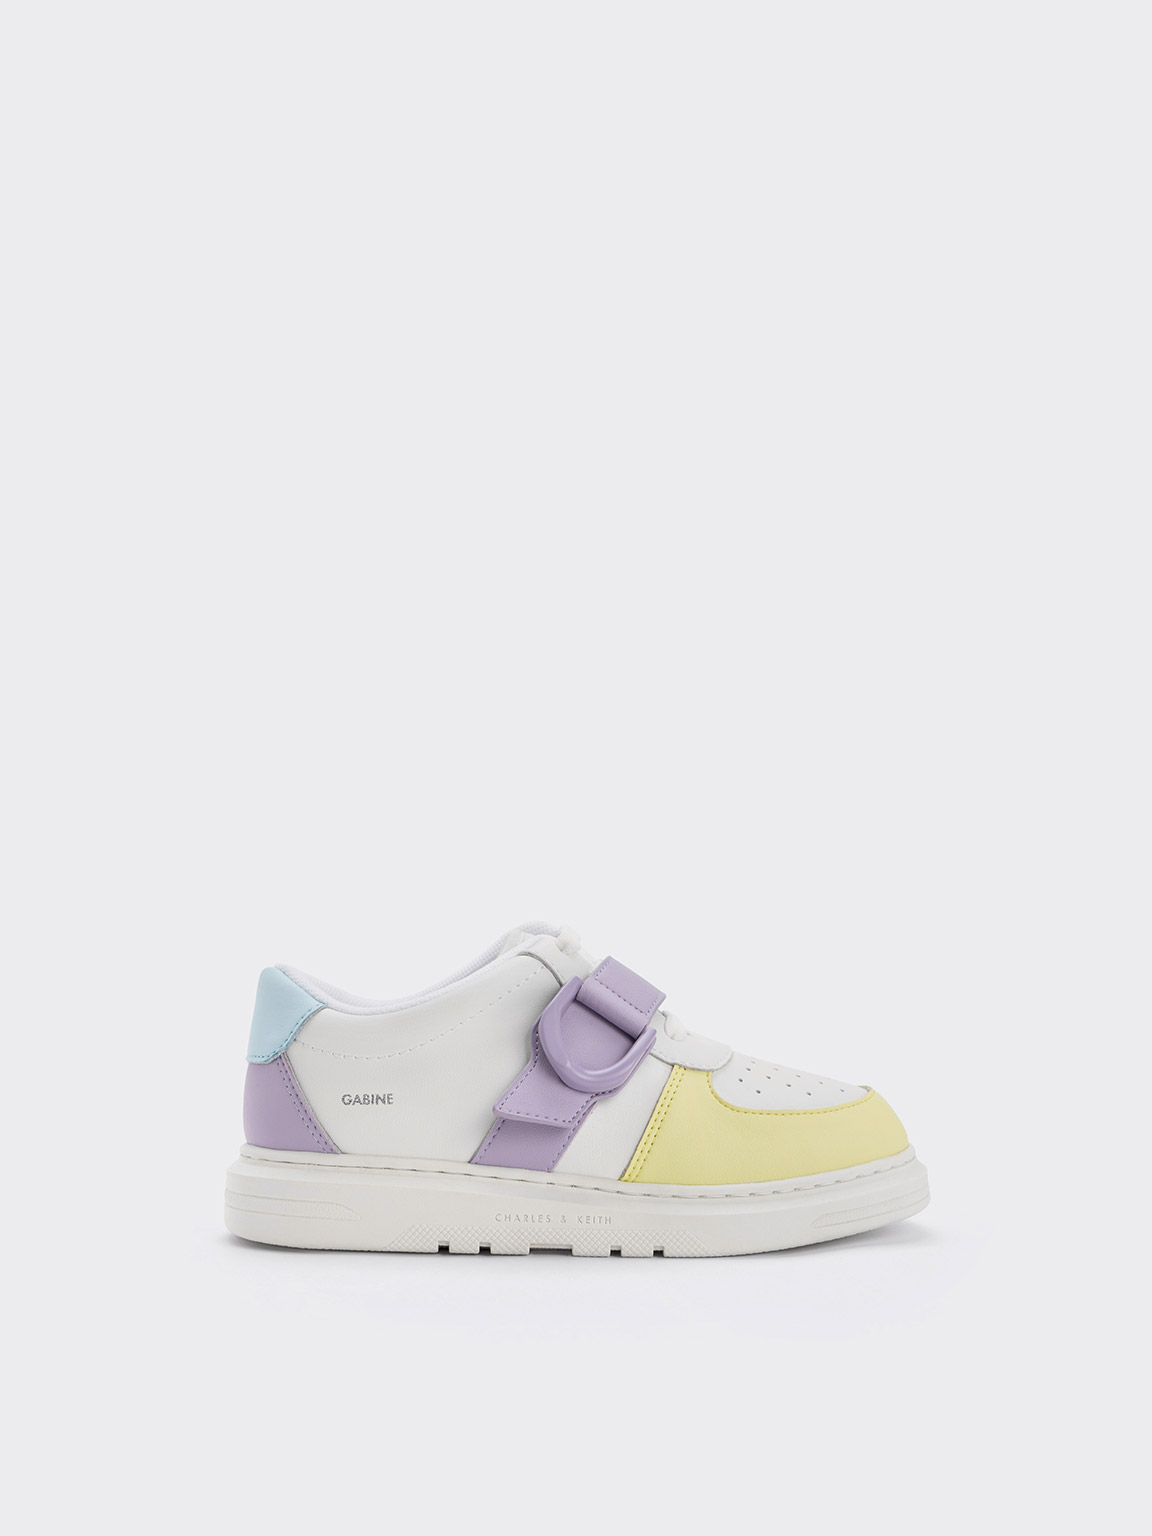 Charles & Keith - Girls' Gabine Leather Low-top Trainer In Multi